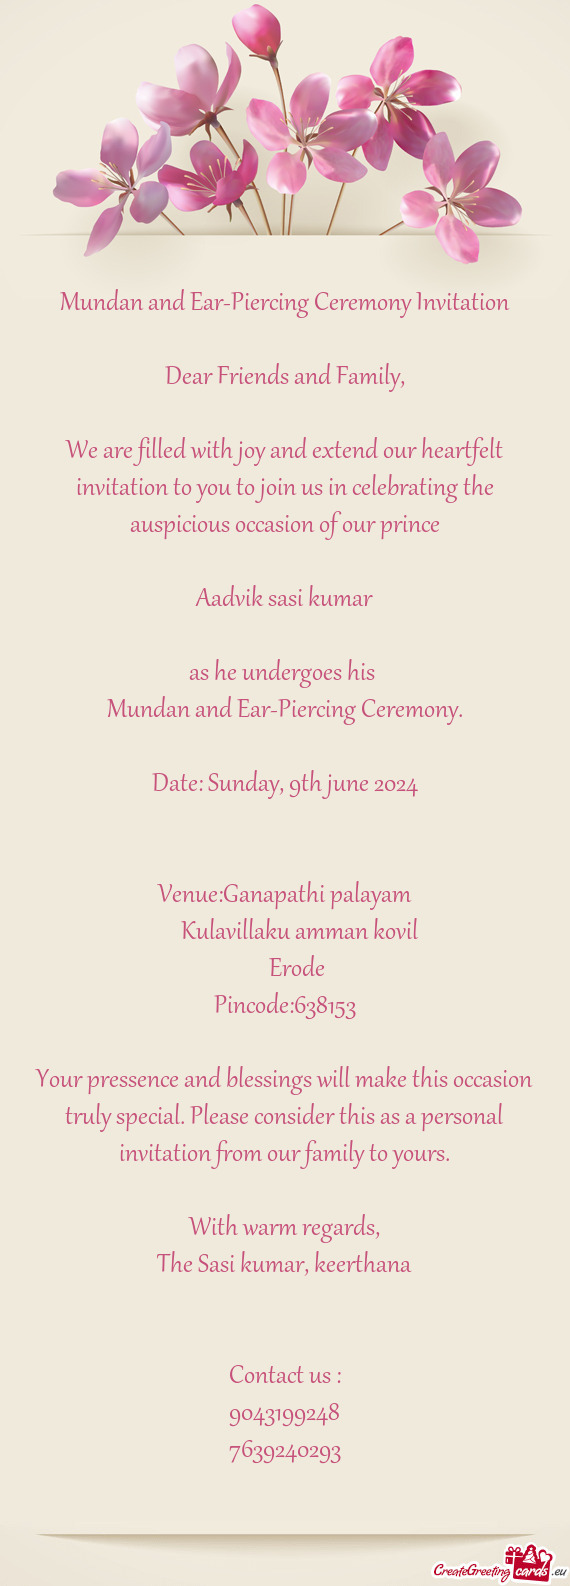 We are filled with joy and extend our heartfelt invitation to you to join us in celebrating the ausp